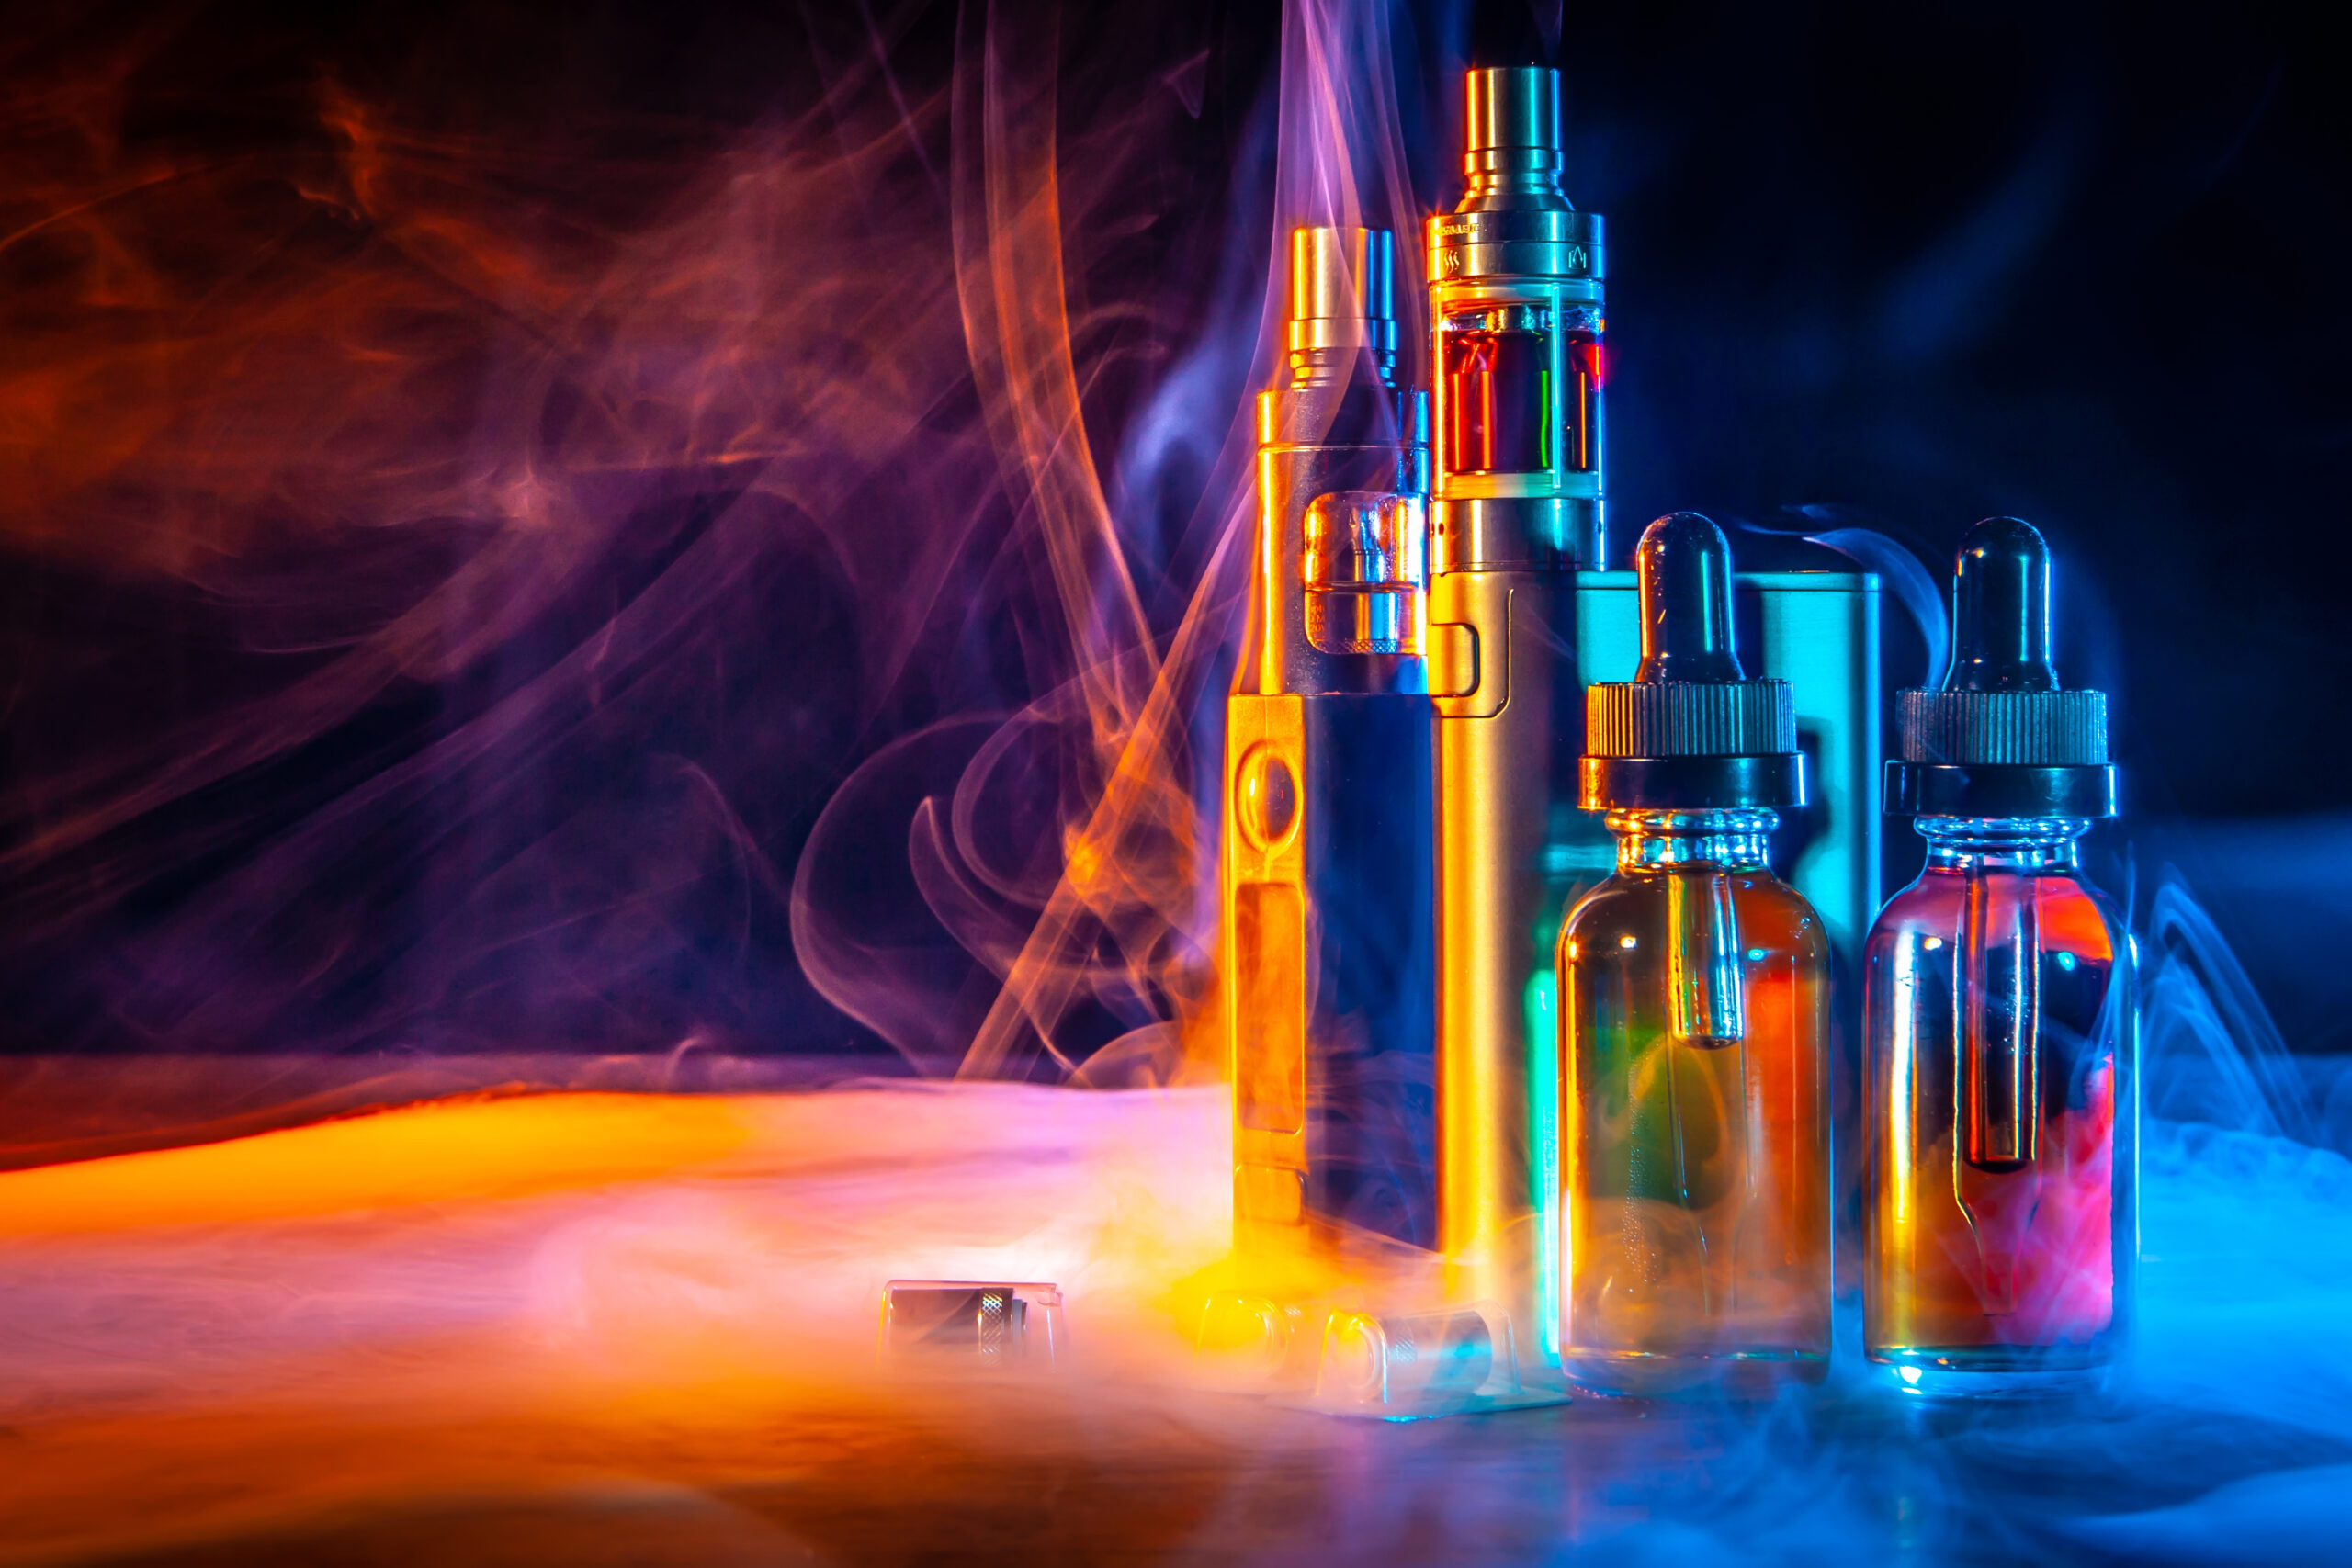 Early Signs Of Vaping Health Risks Were Missed Or Ignored